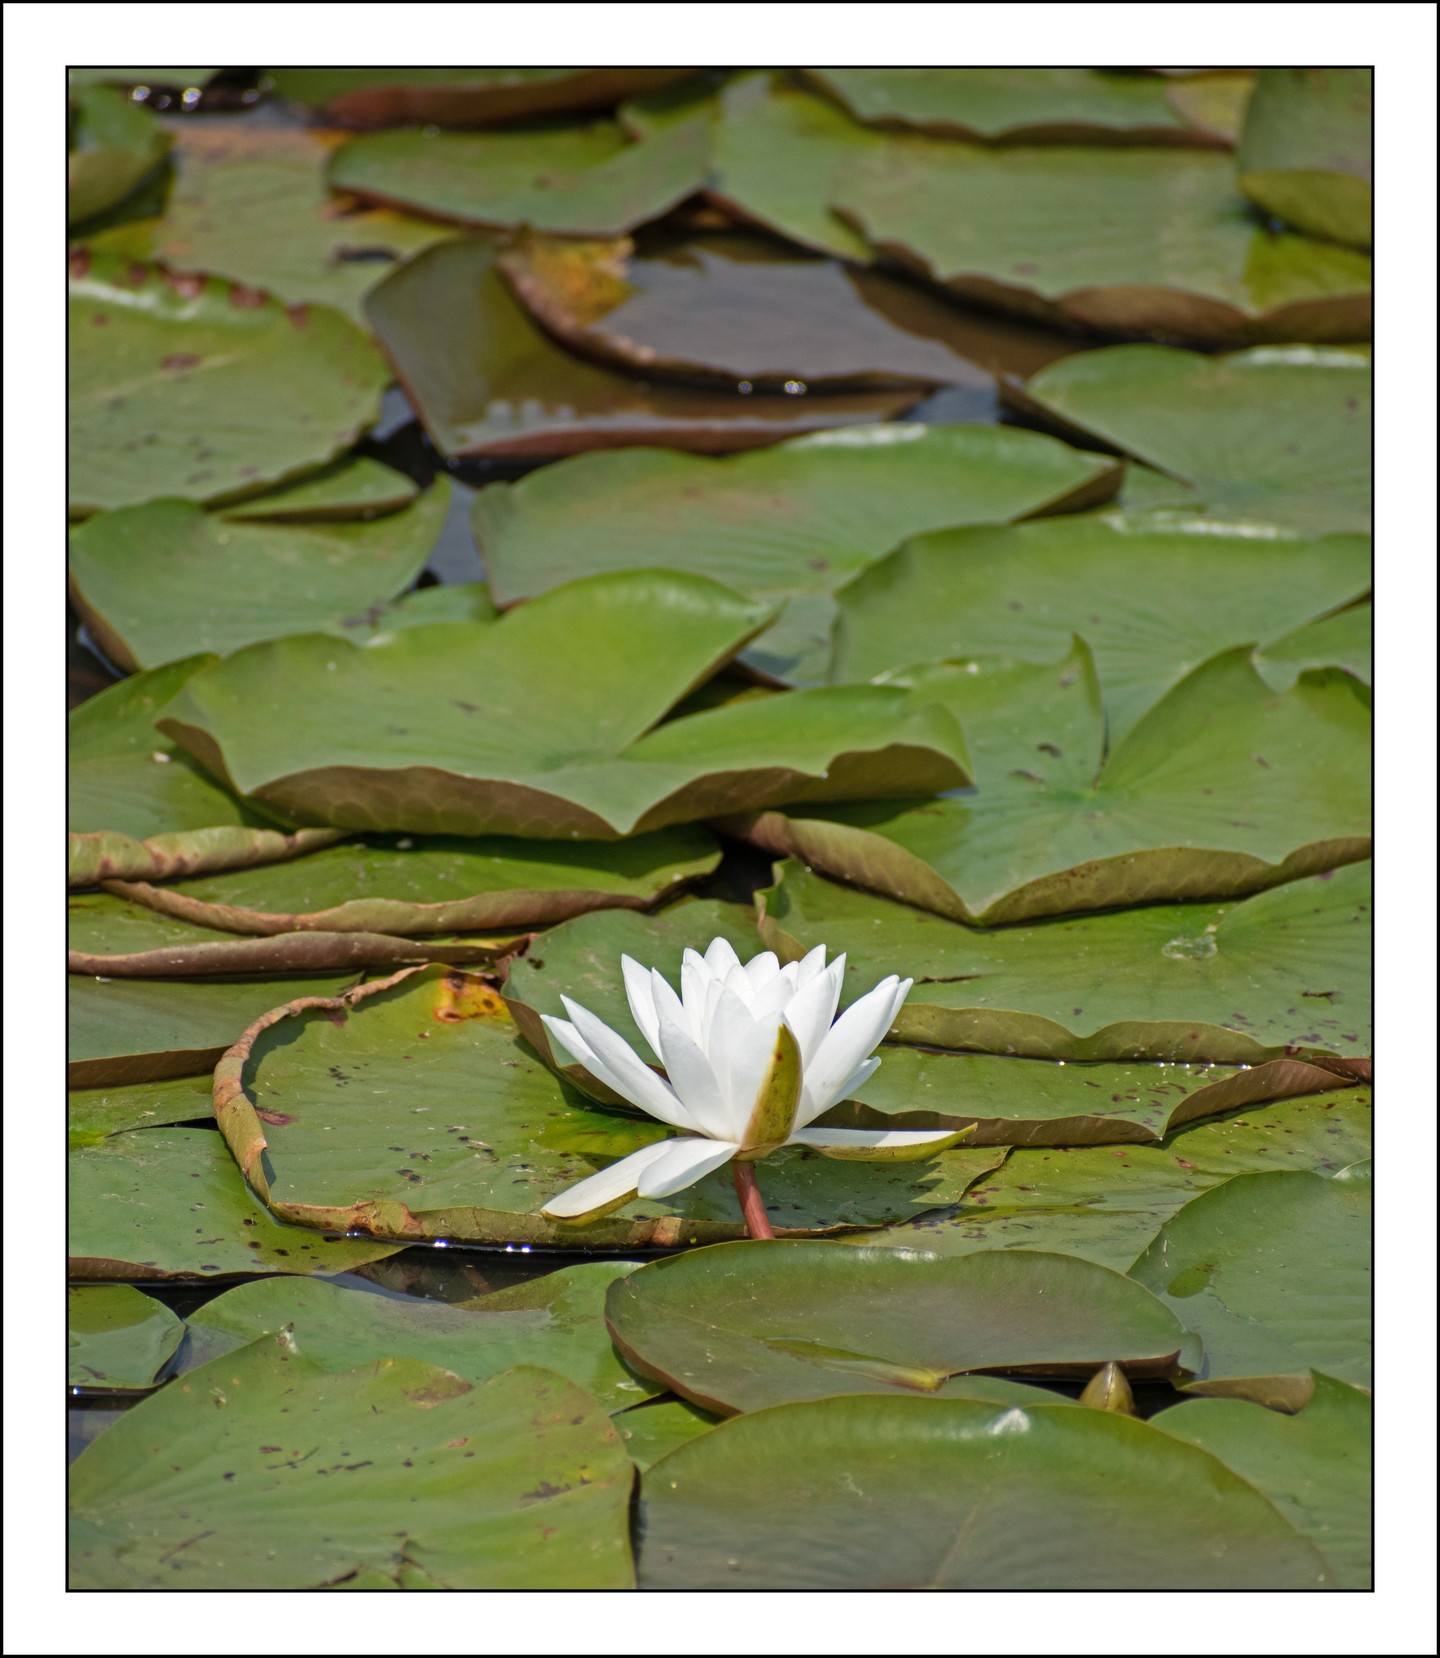 Shot this in the #park with Sean this past weekend.

#lilypad
#waterlilies
#lily
#lilies
#art
#photography
#nature
#nikon
#d5600
#nikond5600